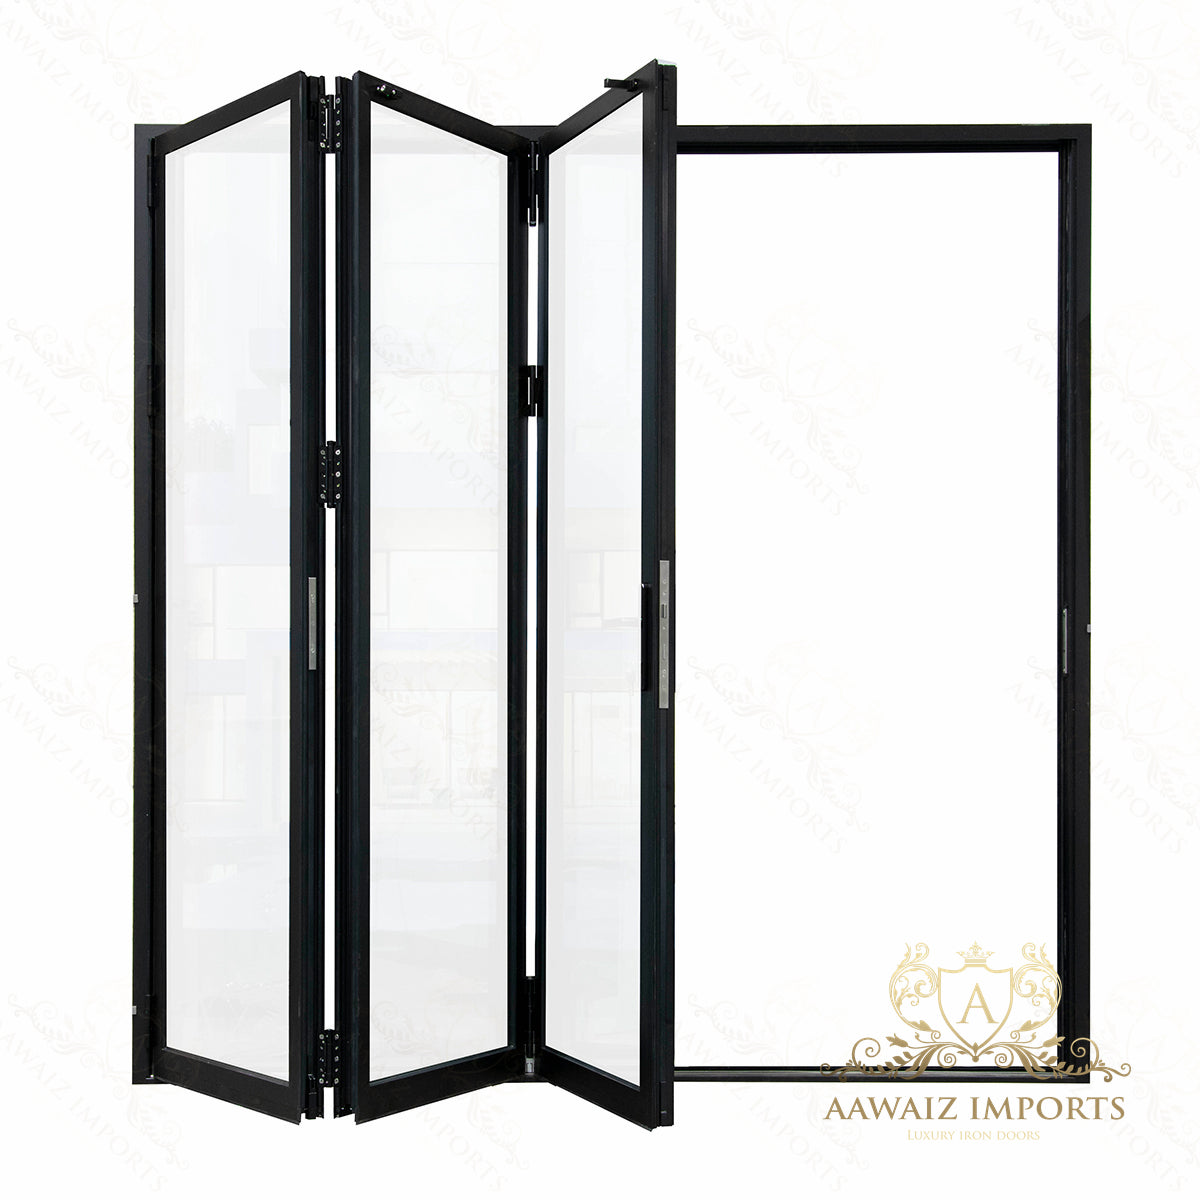 9 Ft Wide By 8 Ft Tall (108" By 96") Aluminum Bi Fold Patio Door  Outswing  Thermal Break Insulated Matt Black Finish